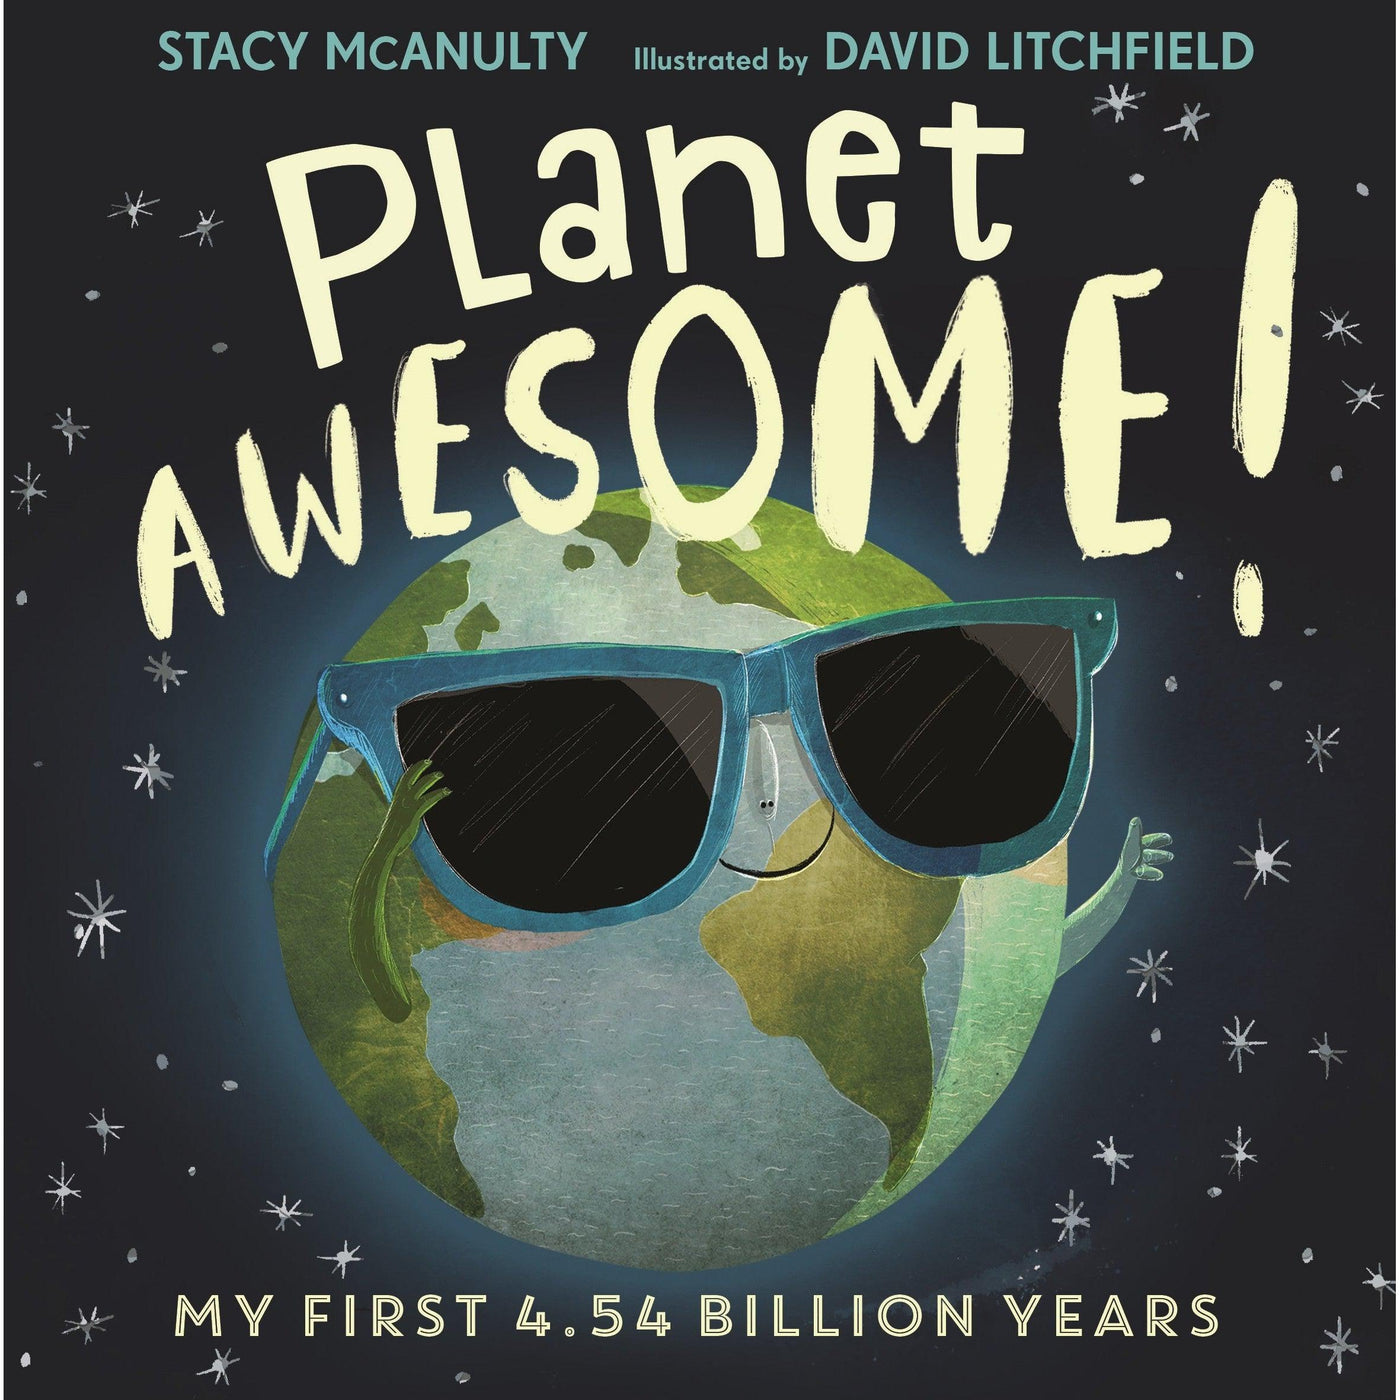 Planet Awesome - Stacy Mcanulty & David Litchfield